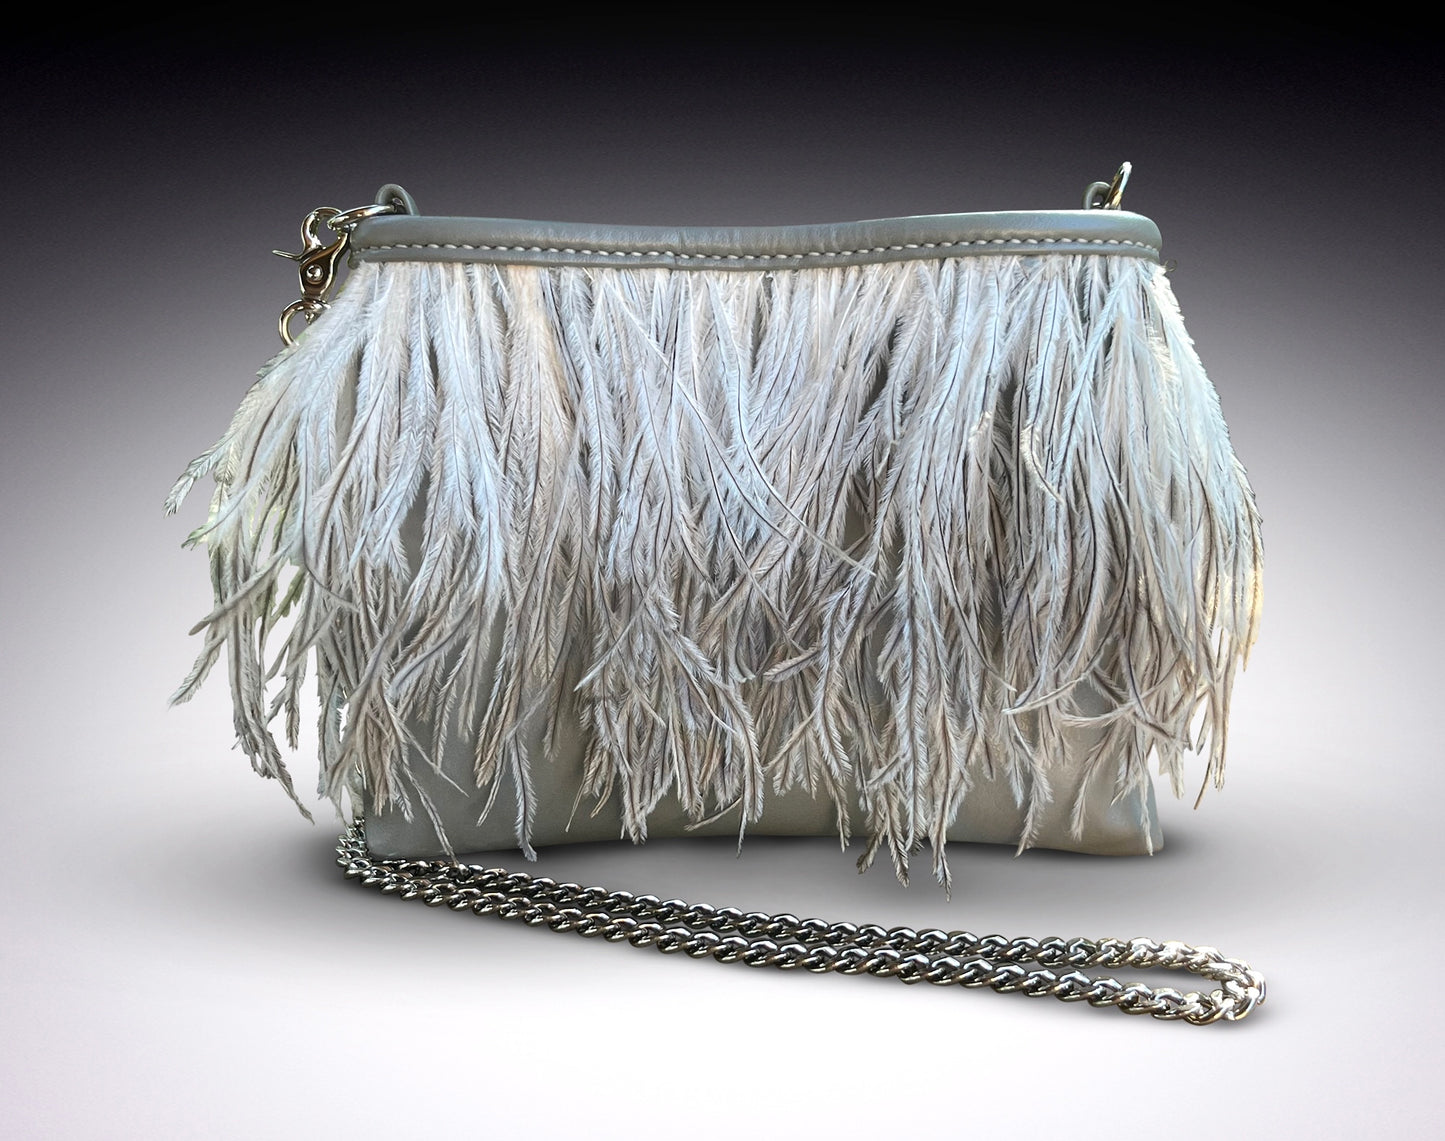 South African ostrich feather bag